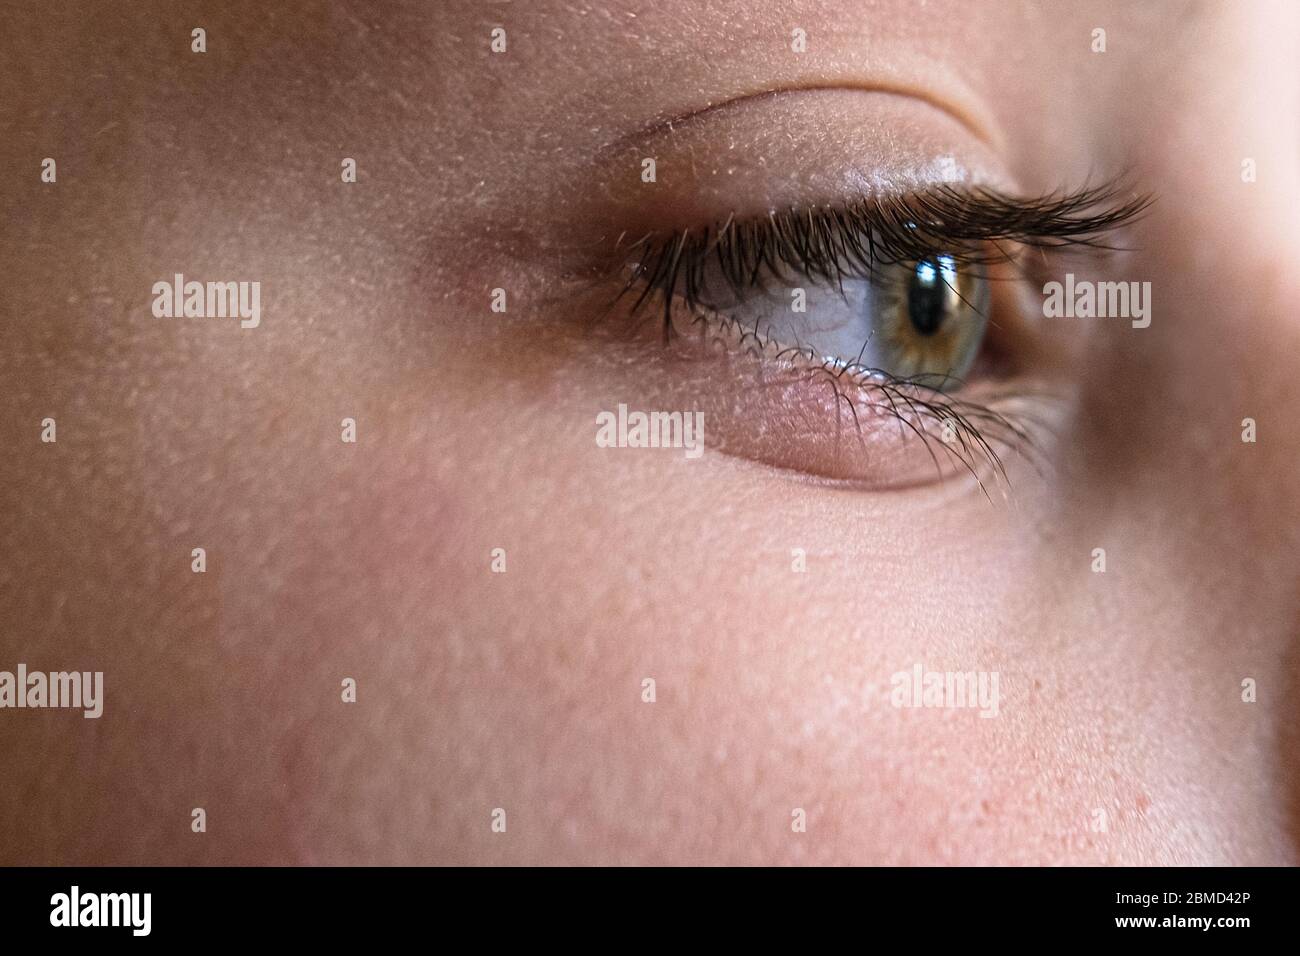 Close up view of kid eye vision detail,macro face skin portrait Stock Photo